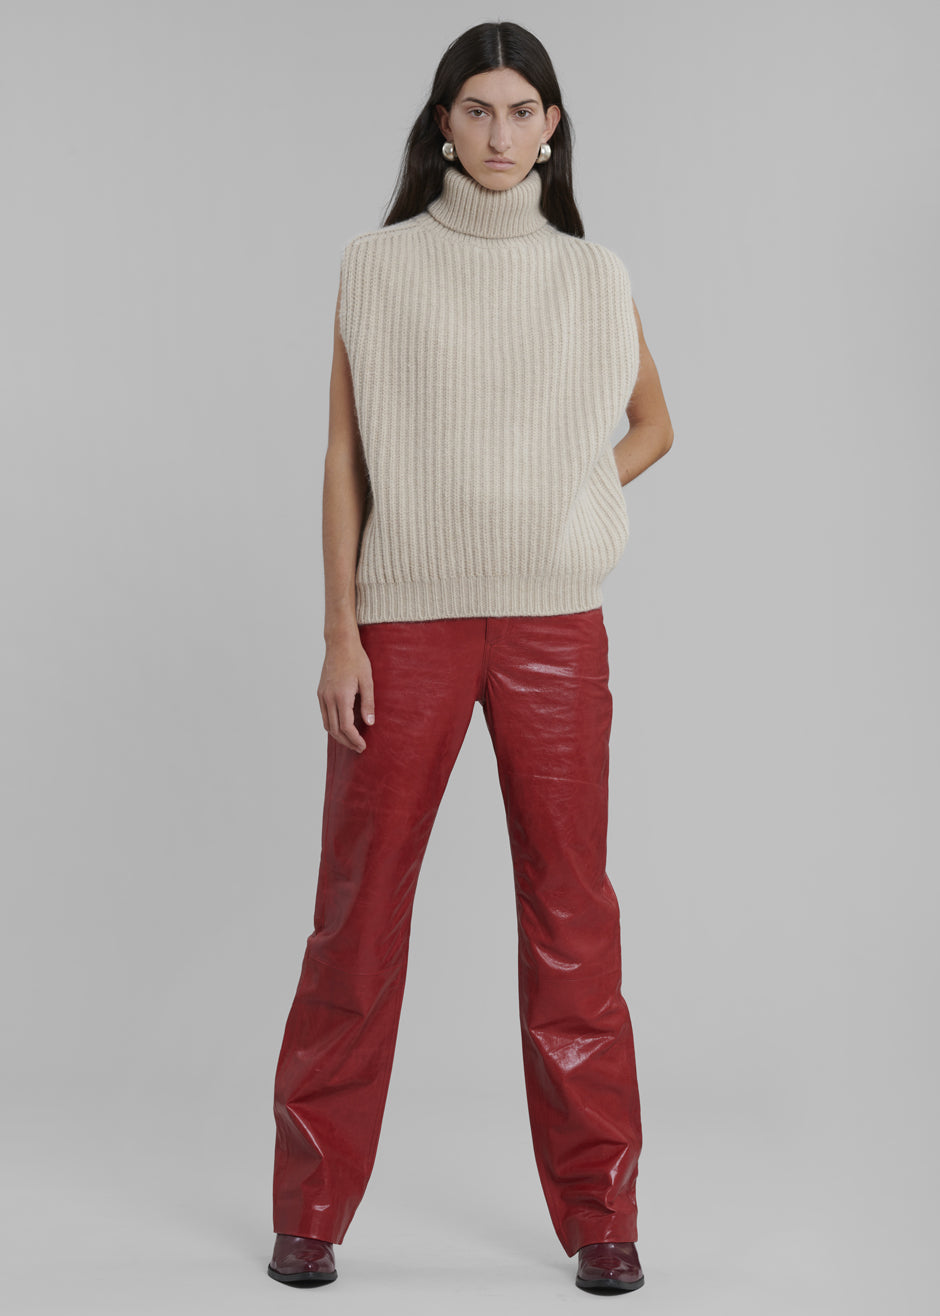 REMAIN Pants Crunchy Leather - Chili Pepper